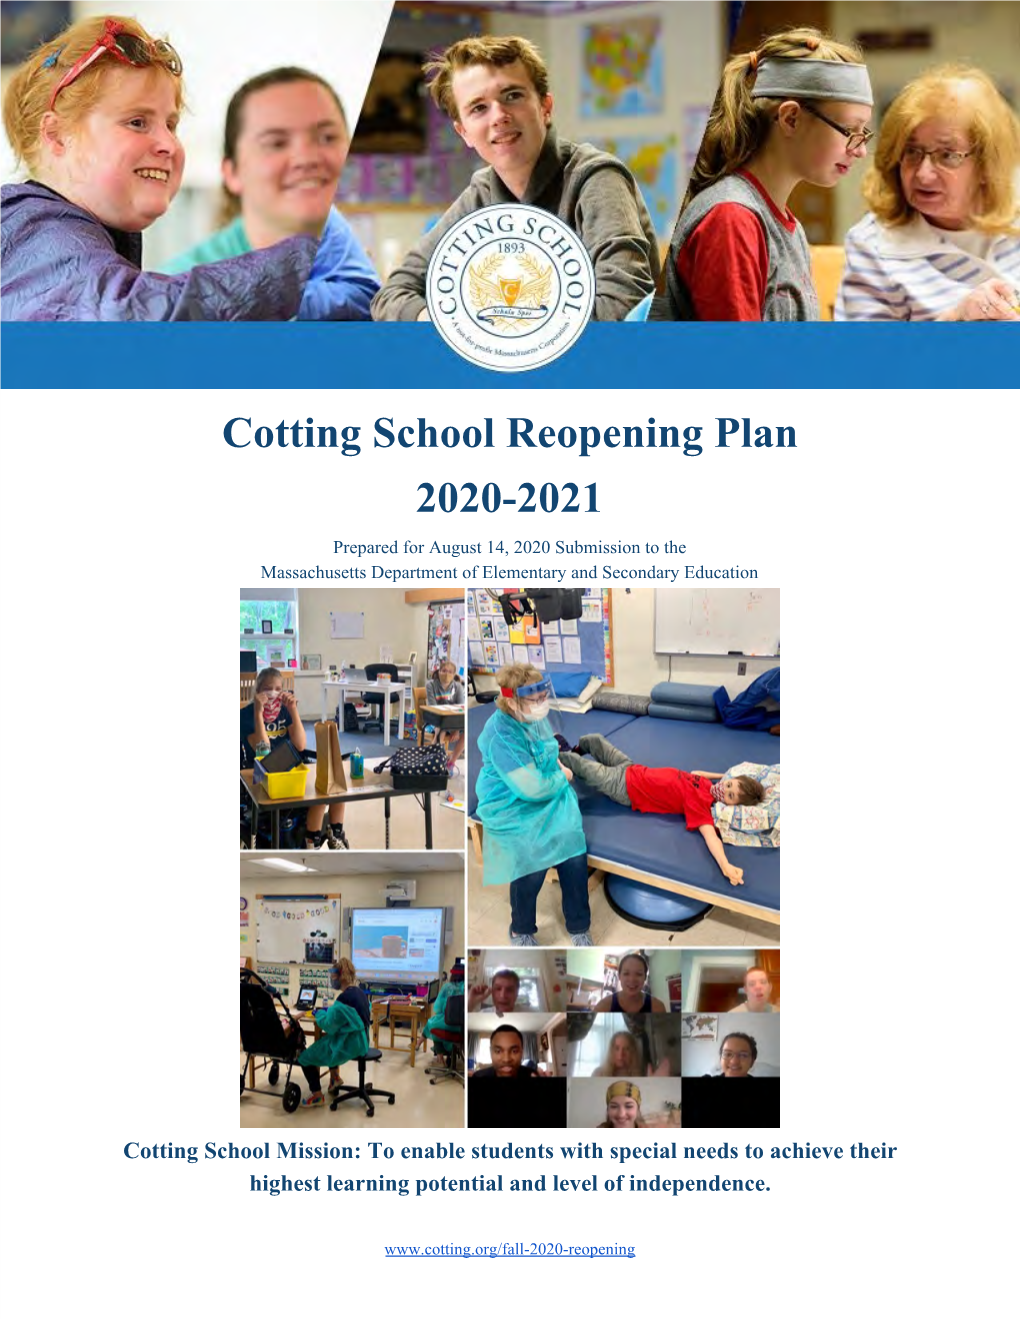 Cotting School Reopening Plan 2020-2021 Prepared for August 14, 2020 Submission to the Massachusetts Department of Elementary and Secondary Education